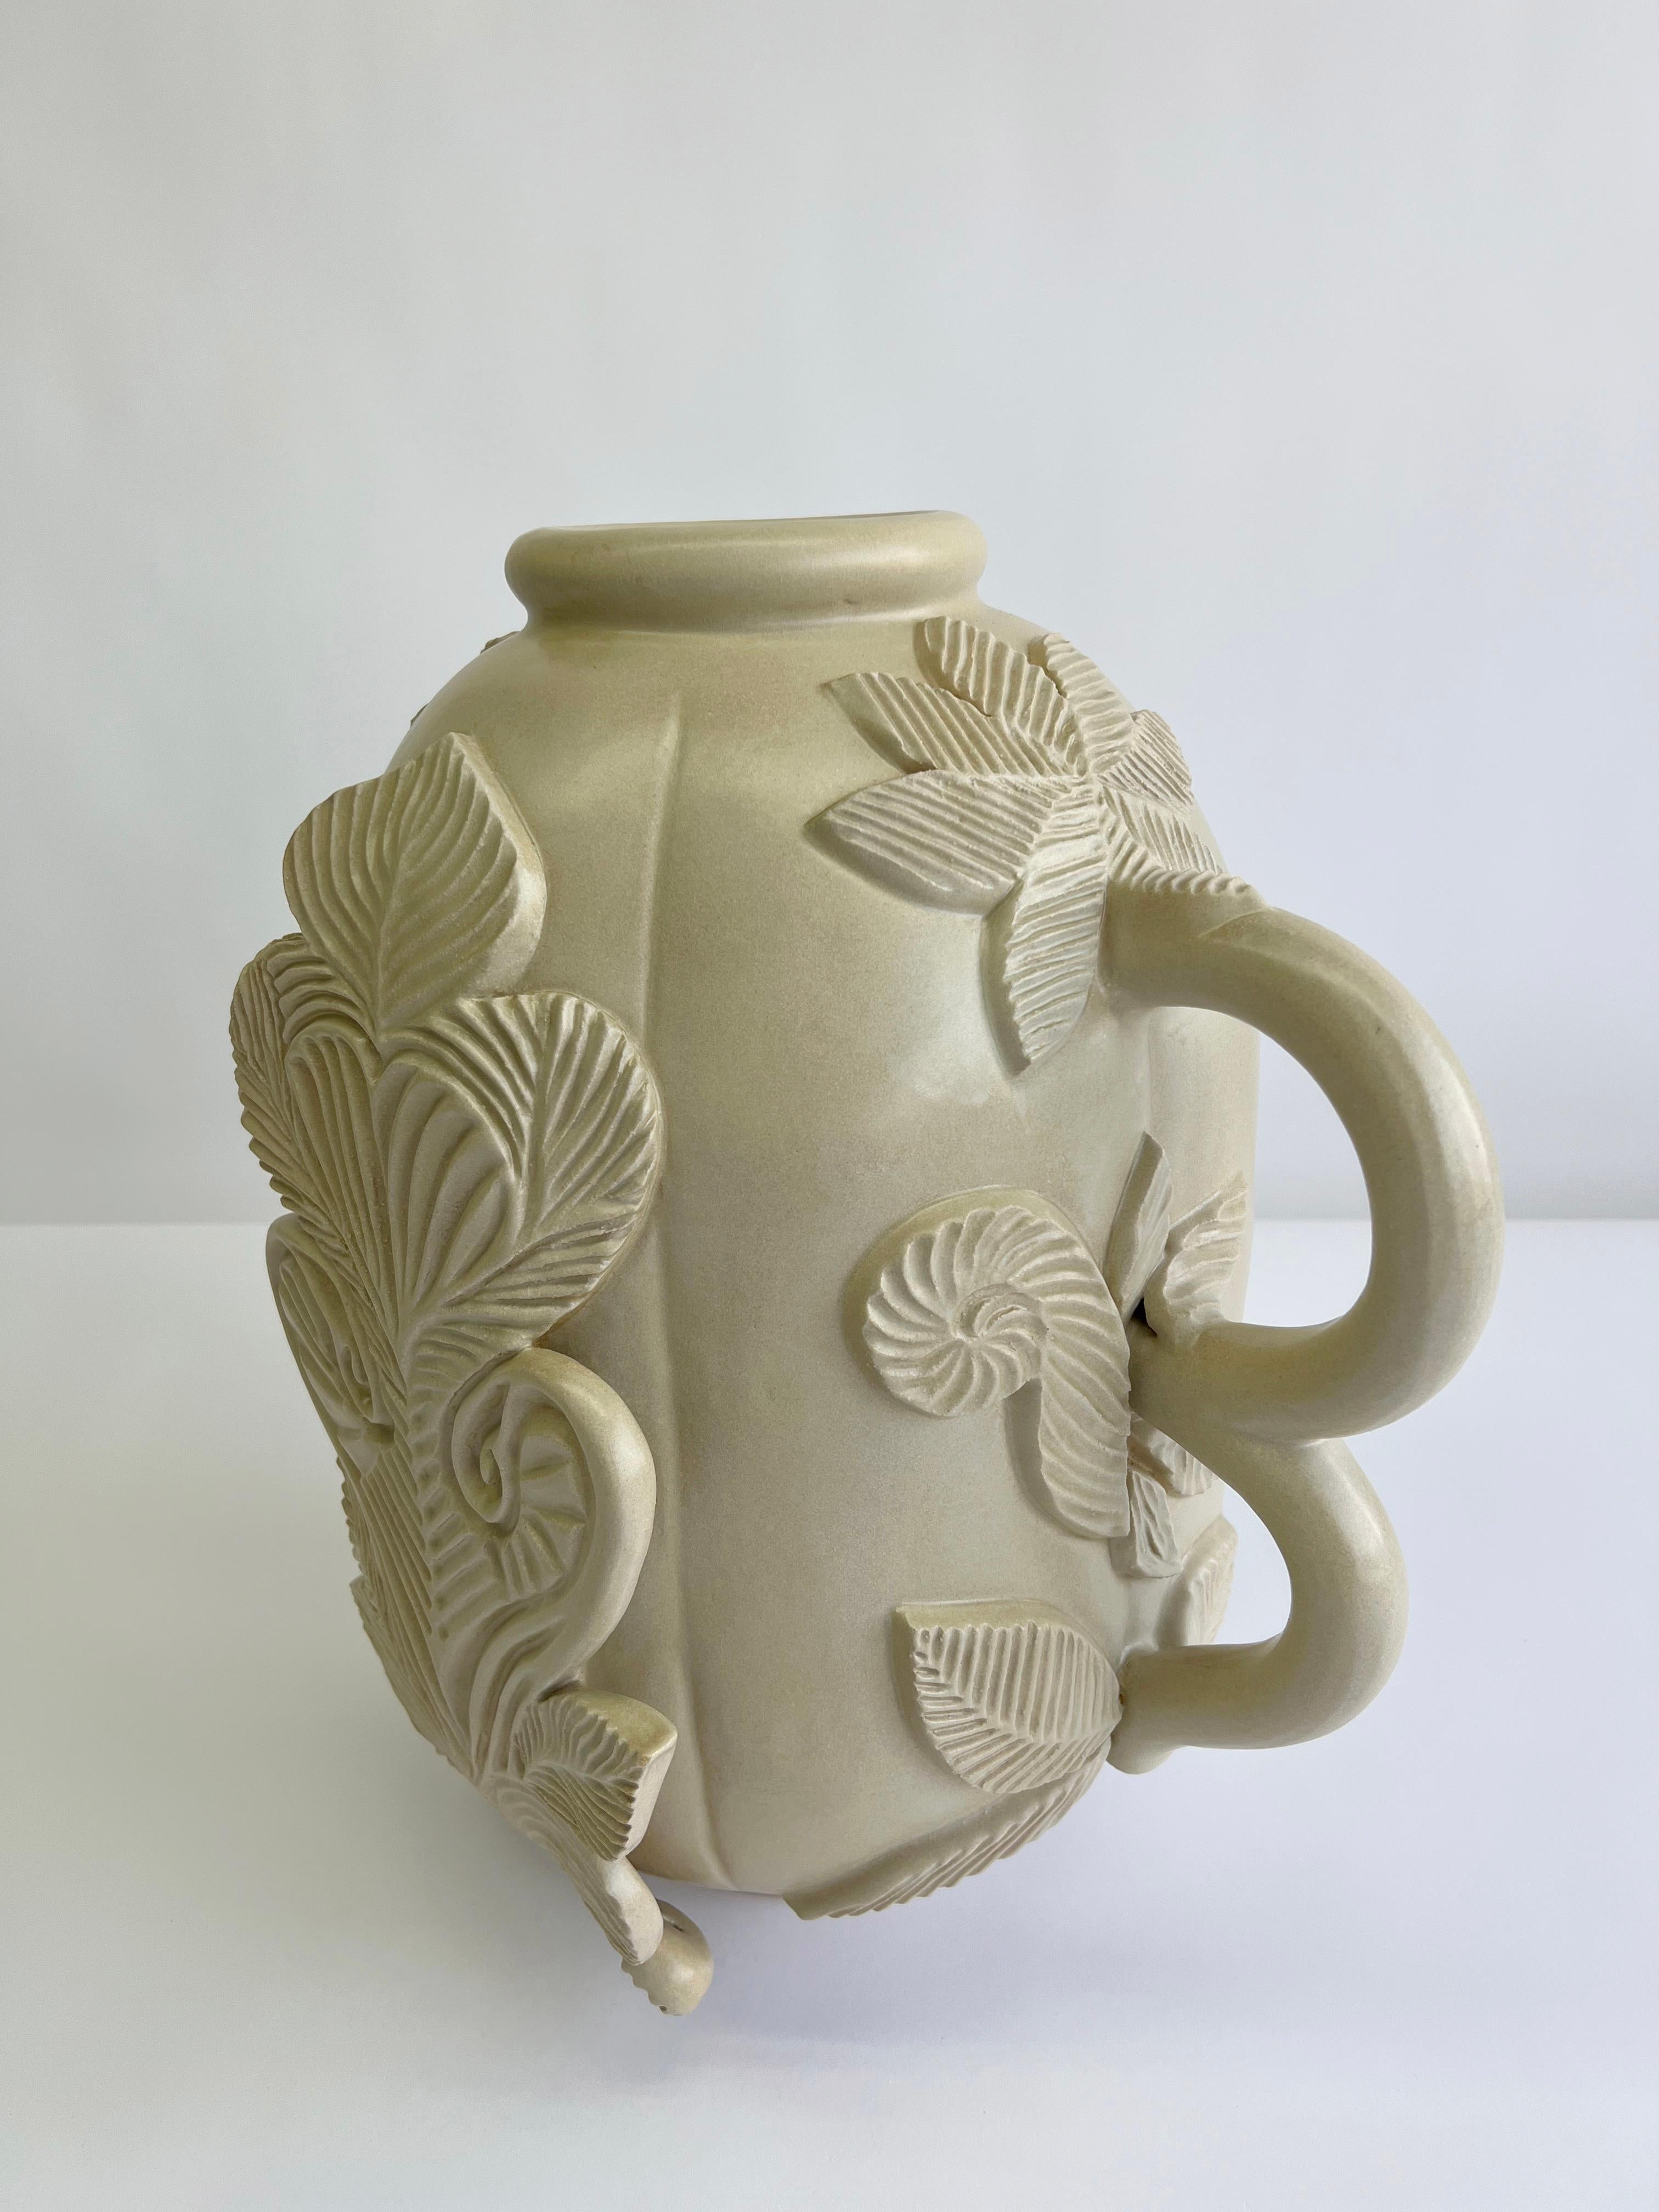 Hand-Crafted Ceramic Stoneware Organic Contemporary Vase in Cream by Keavy Murphree For Sale